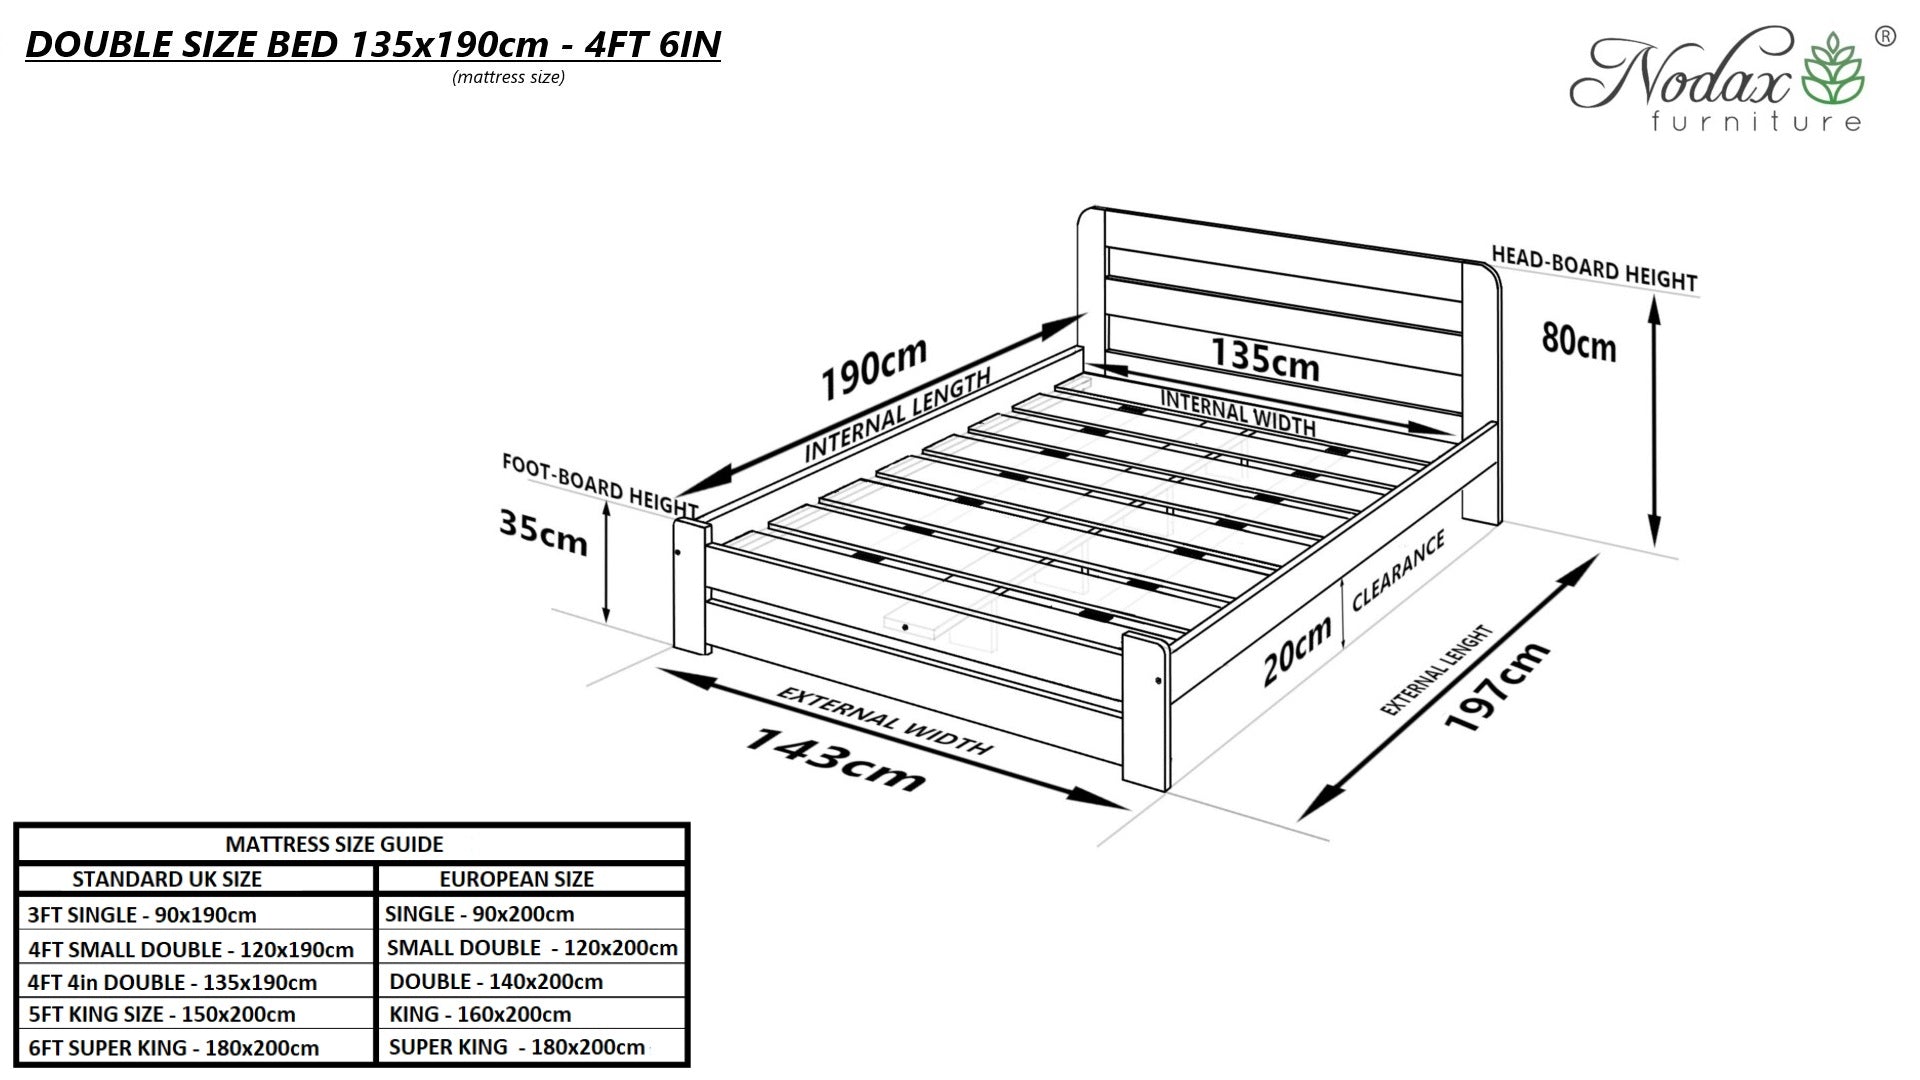 Bed-frame-Beta-dimensions-4ft6in